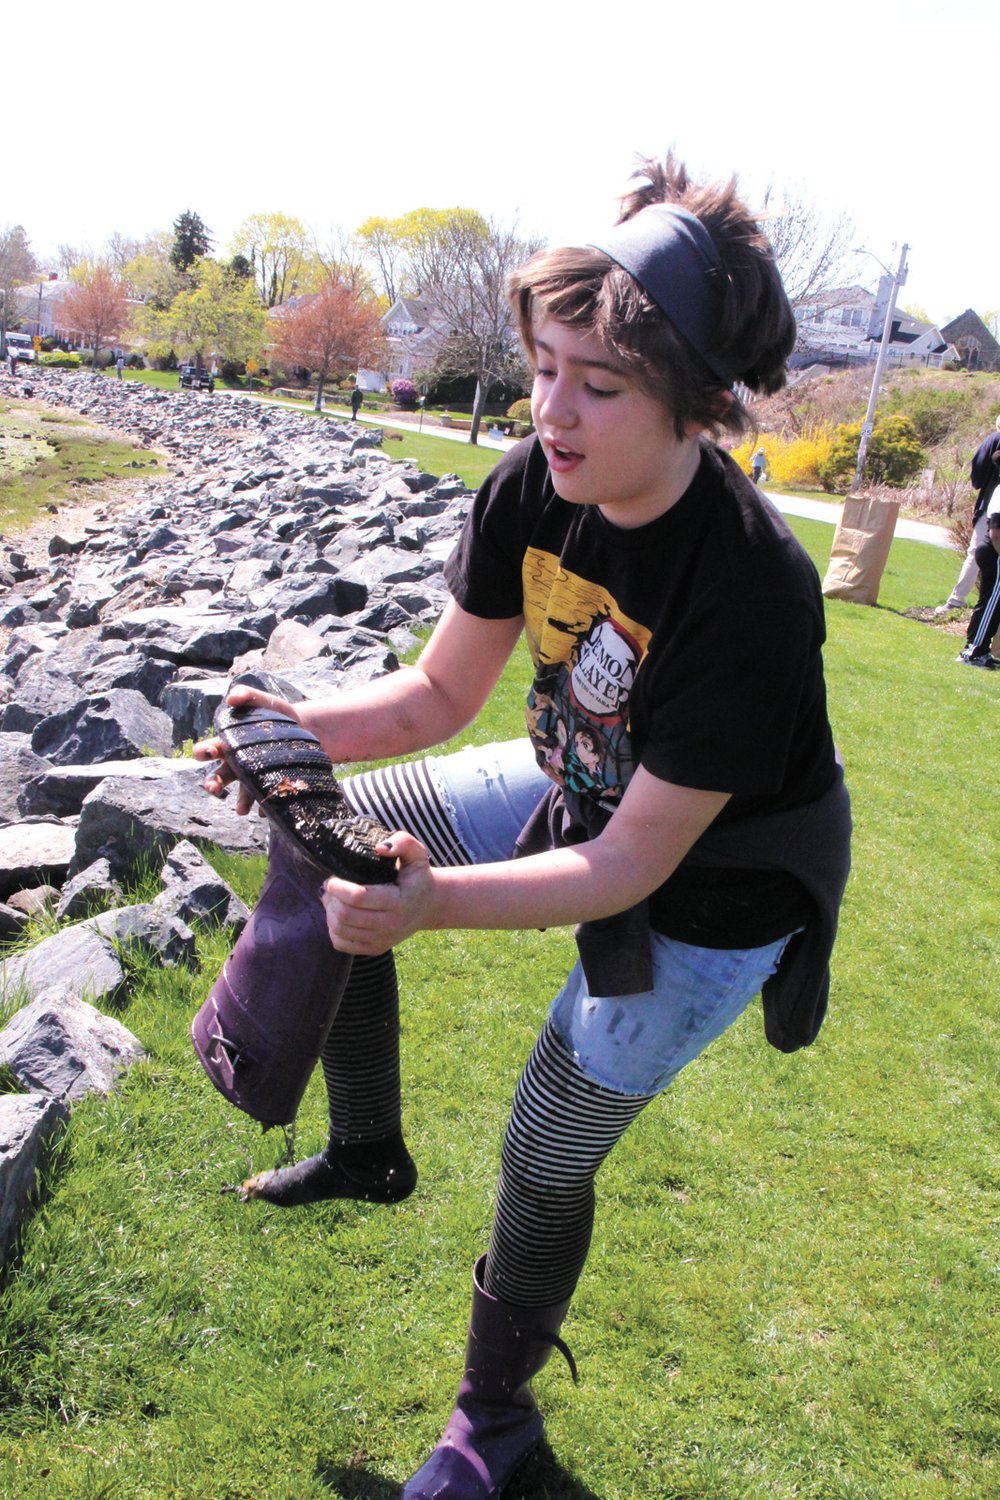 Out of the muck: Hazel Robinson empties her boots of water after becoming stuck in the mud along with another young woman Saturday during the Stillhouse Cove salt marsh and park cleanup Saturday. Hazel was not perturbed by the incident, noting this is the third year in a row that it’s happened to her during the cleanup.  (Cranston Herald photos)